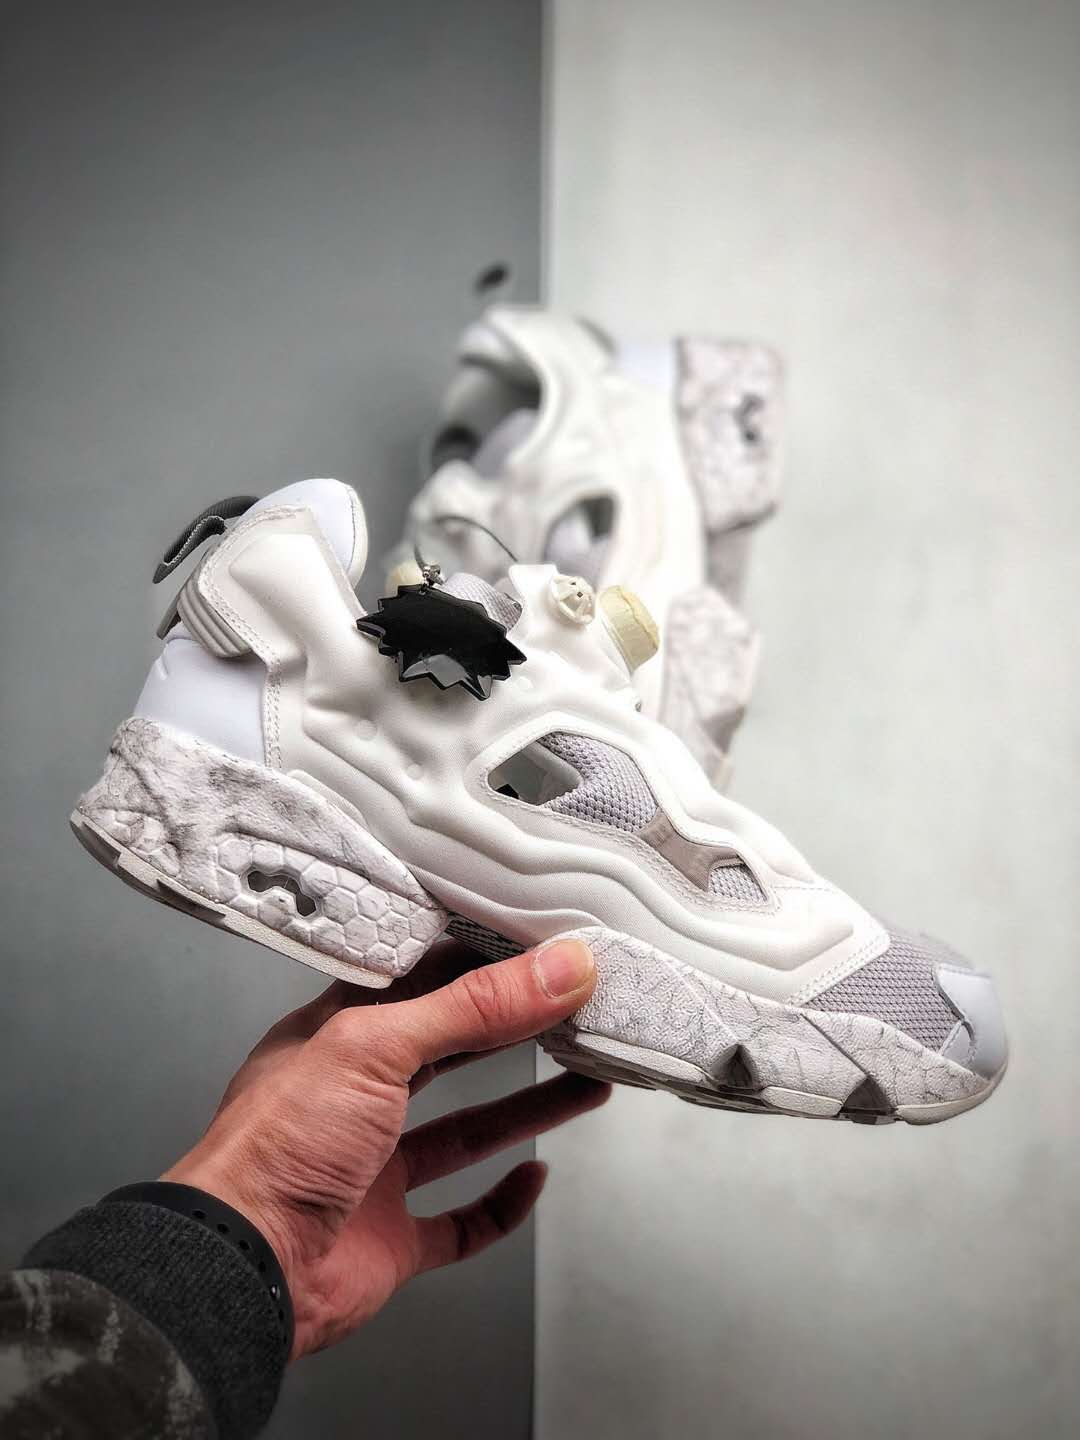 Reebok Instapump Fury Achm Running Shoes White BD1550 - Sleek and Stylish Footwear for Superior Performance